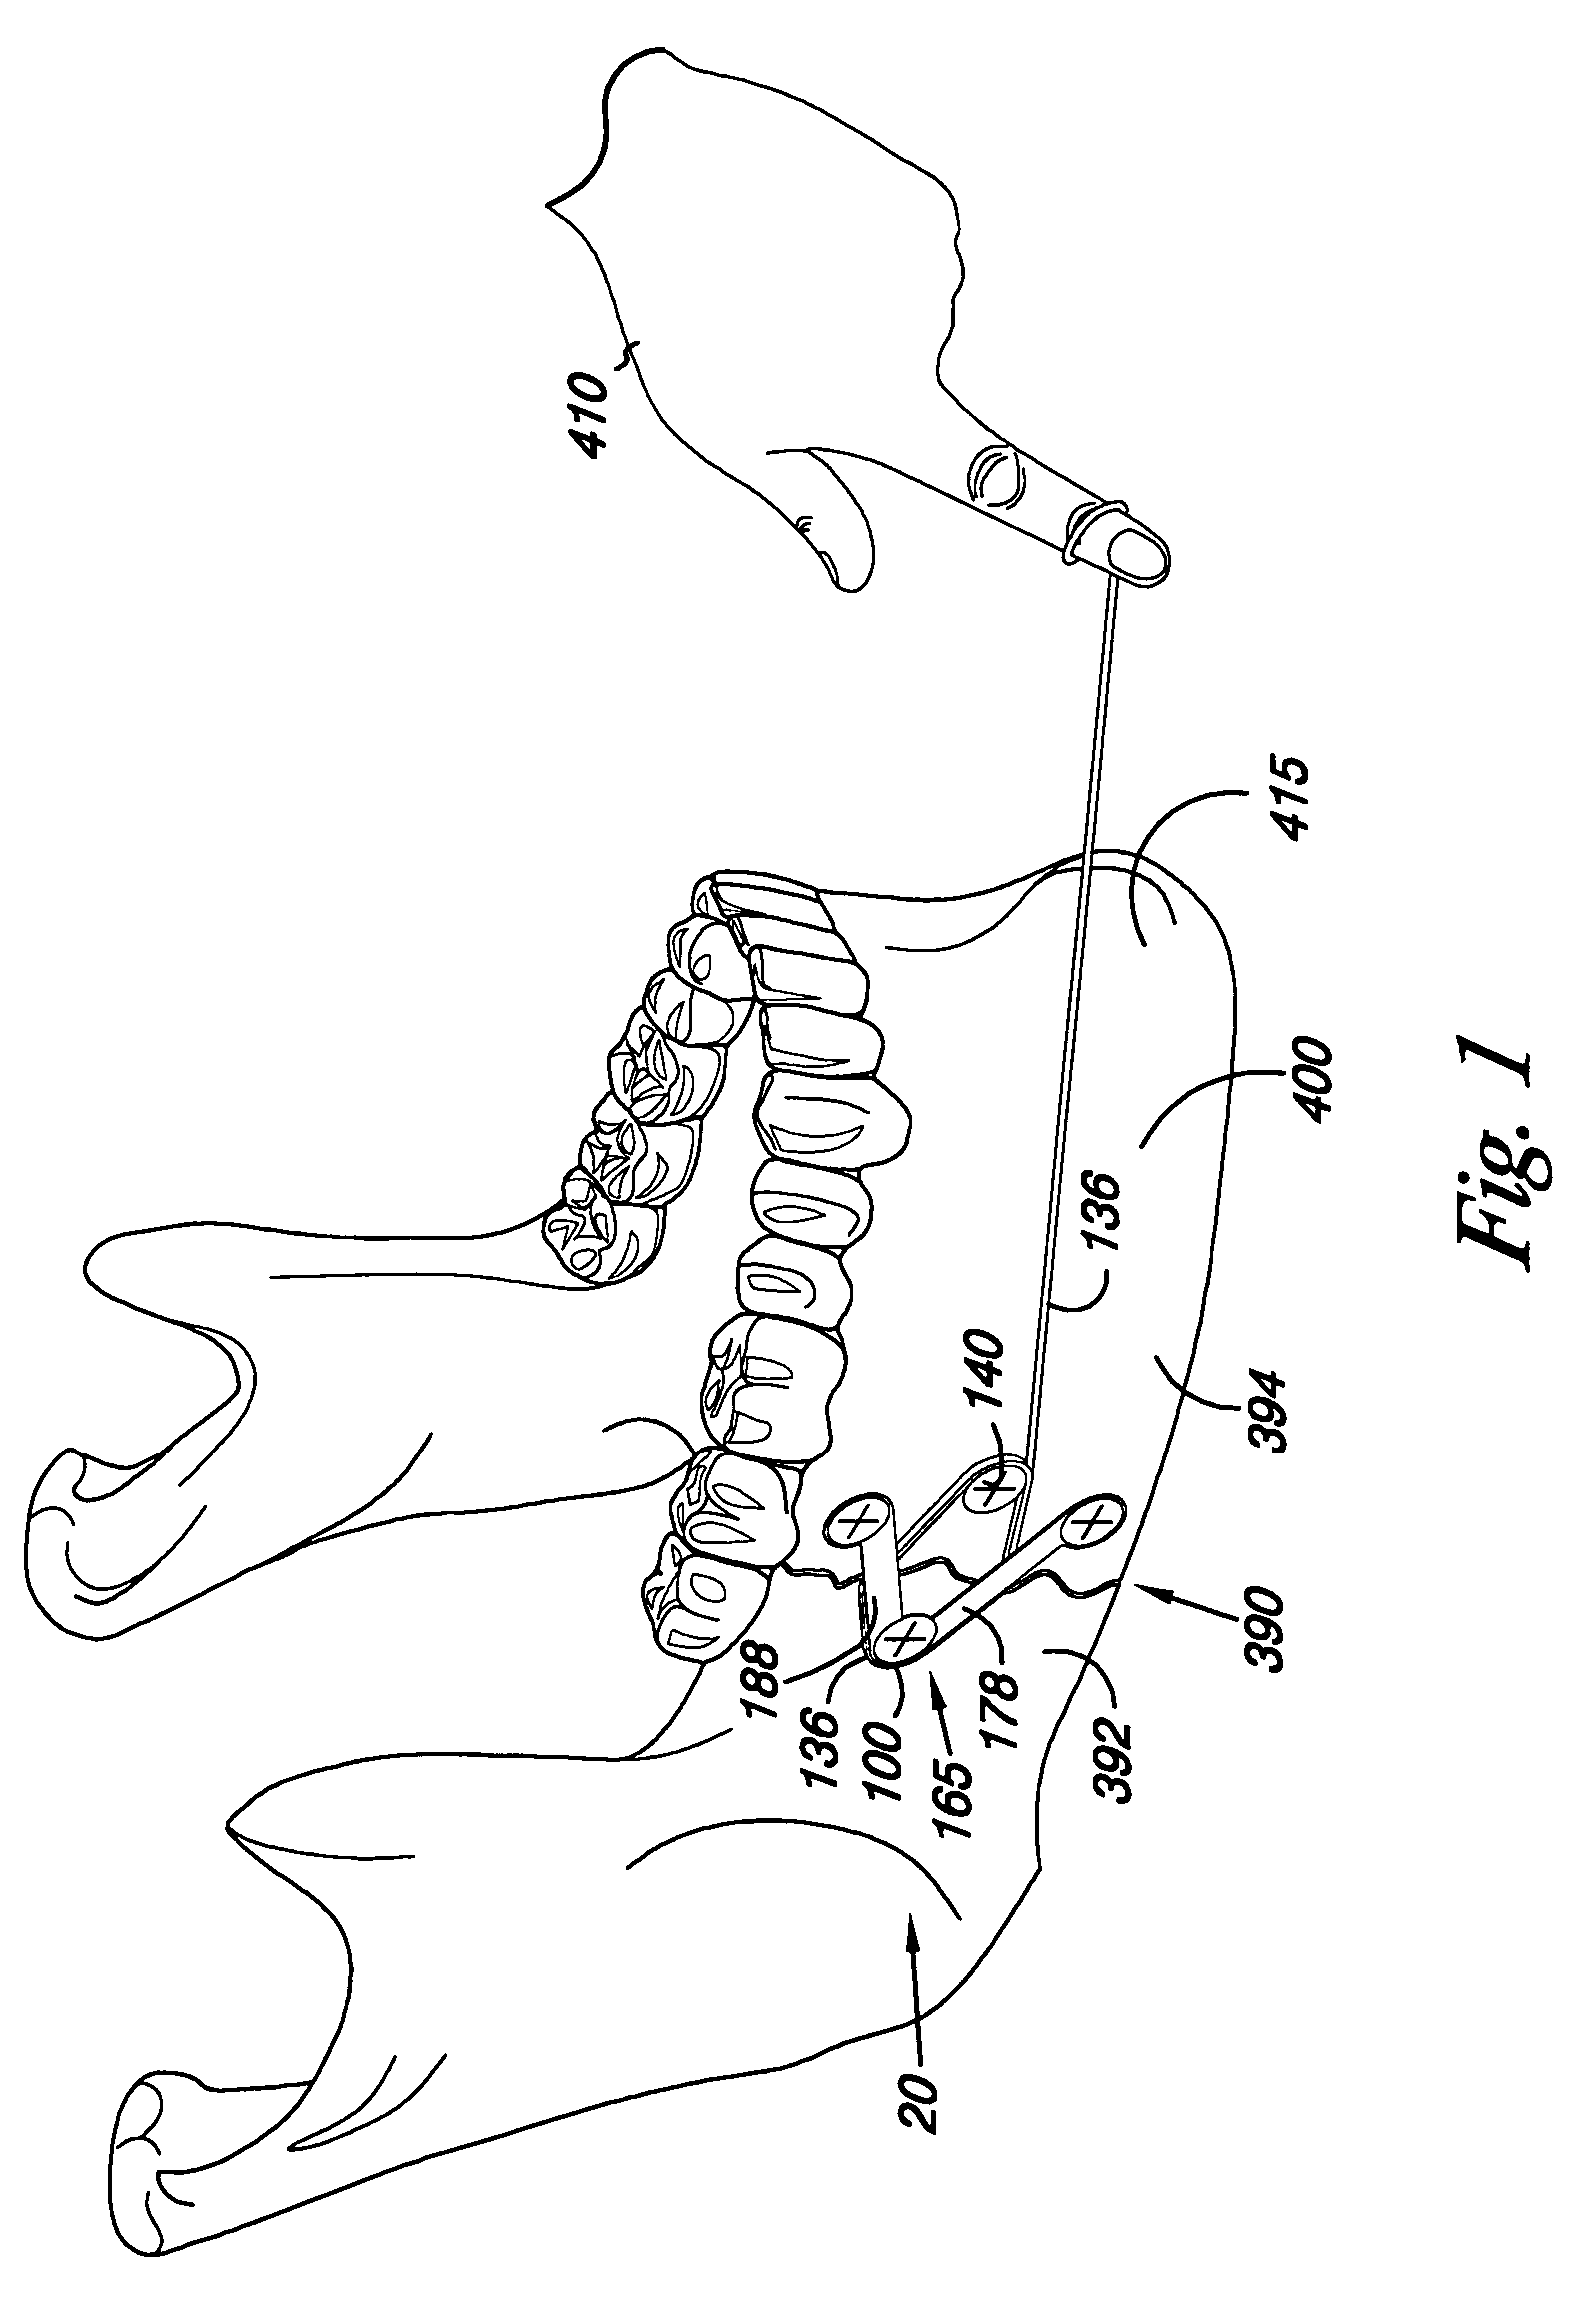 Apparatus and methods for bone fracture reduction and fixation